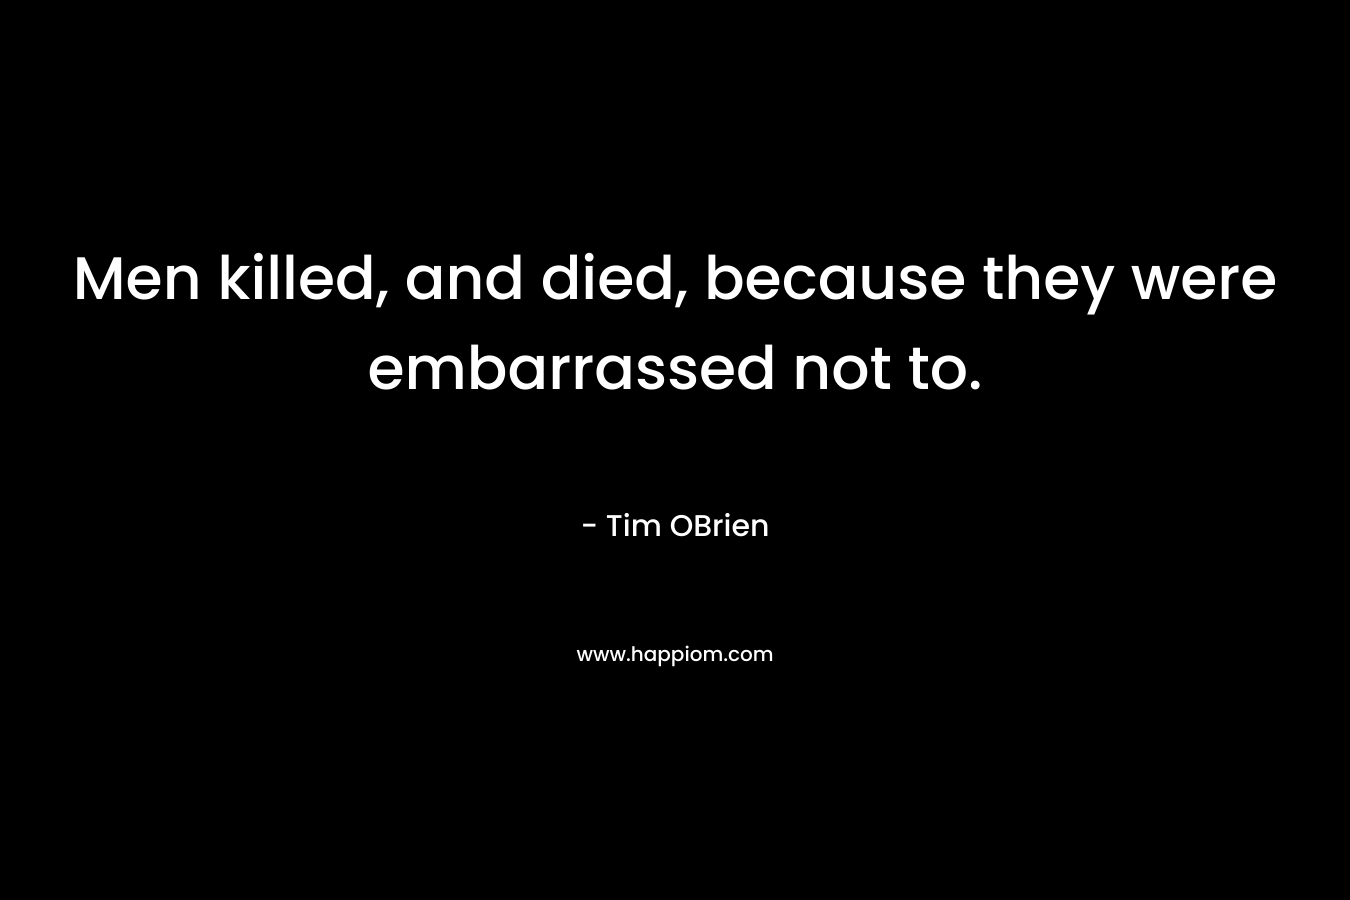 Men killed, and died, because they were embarrassed not to. – Tim OBrien